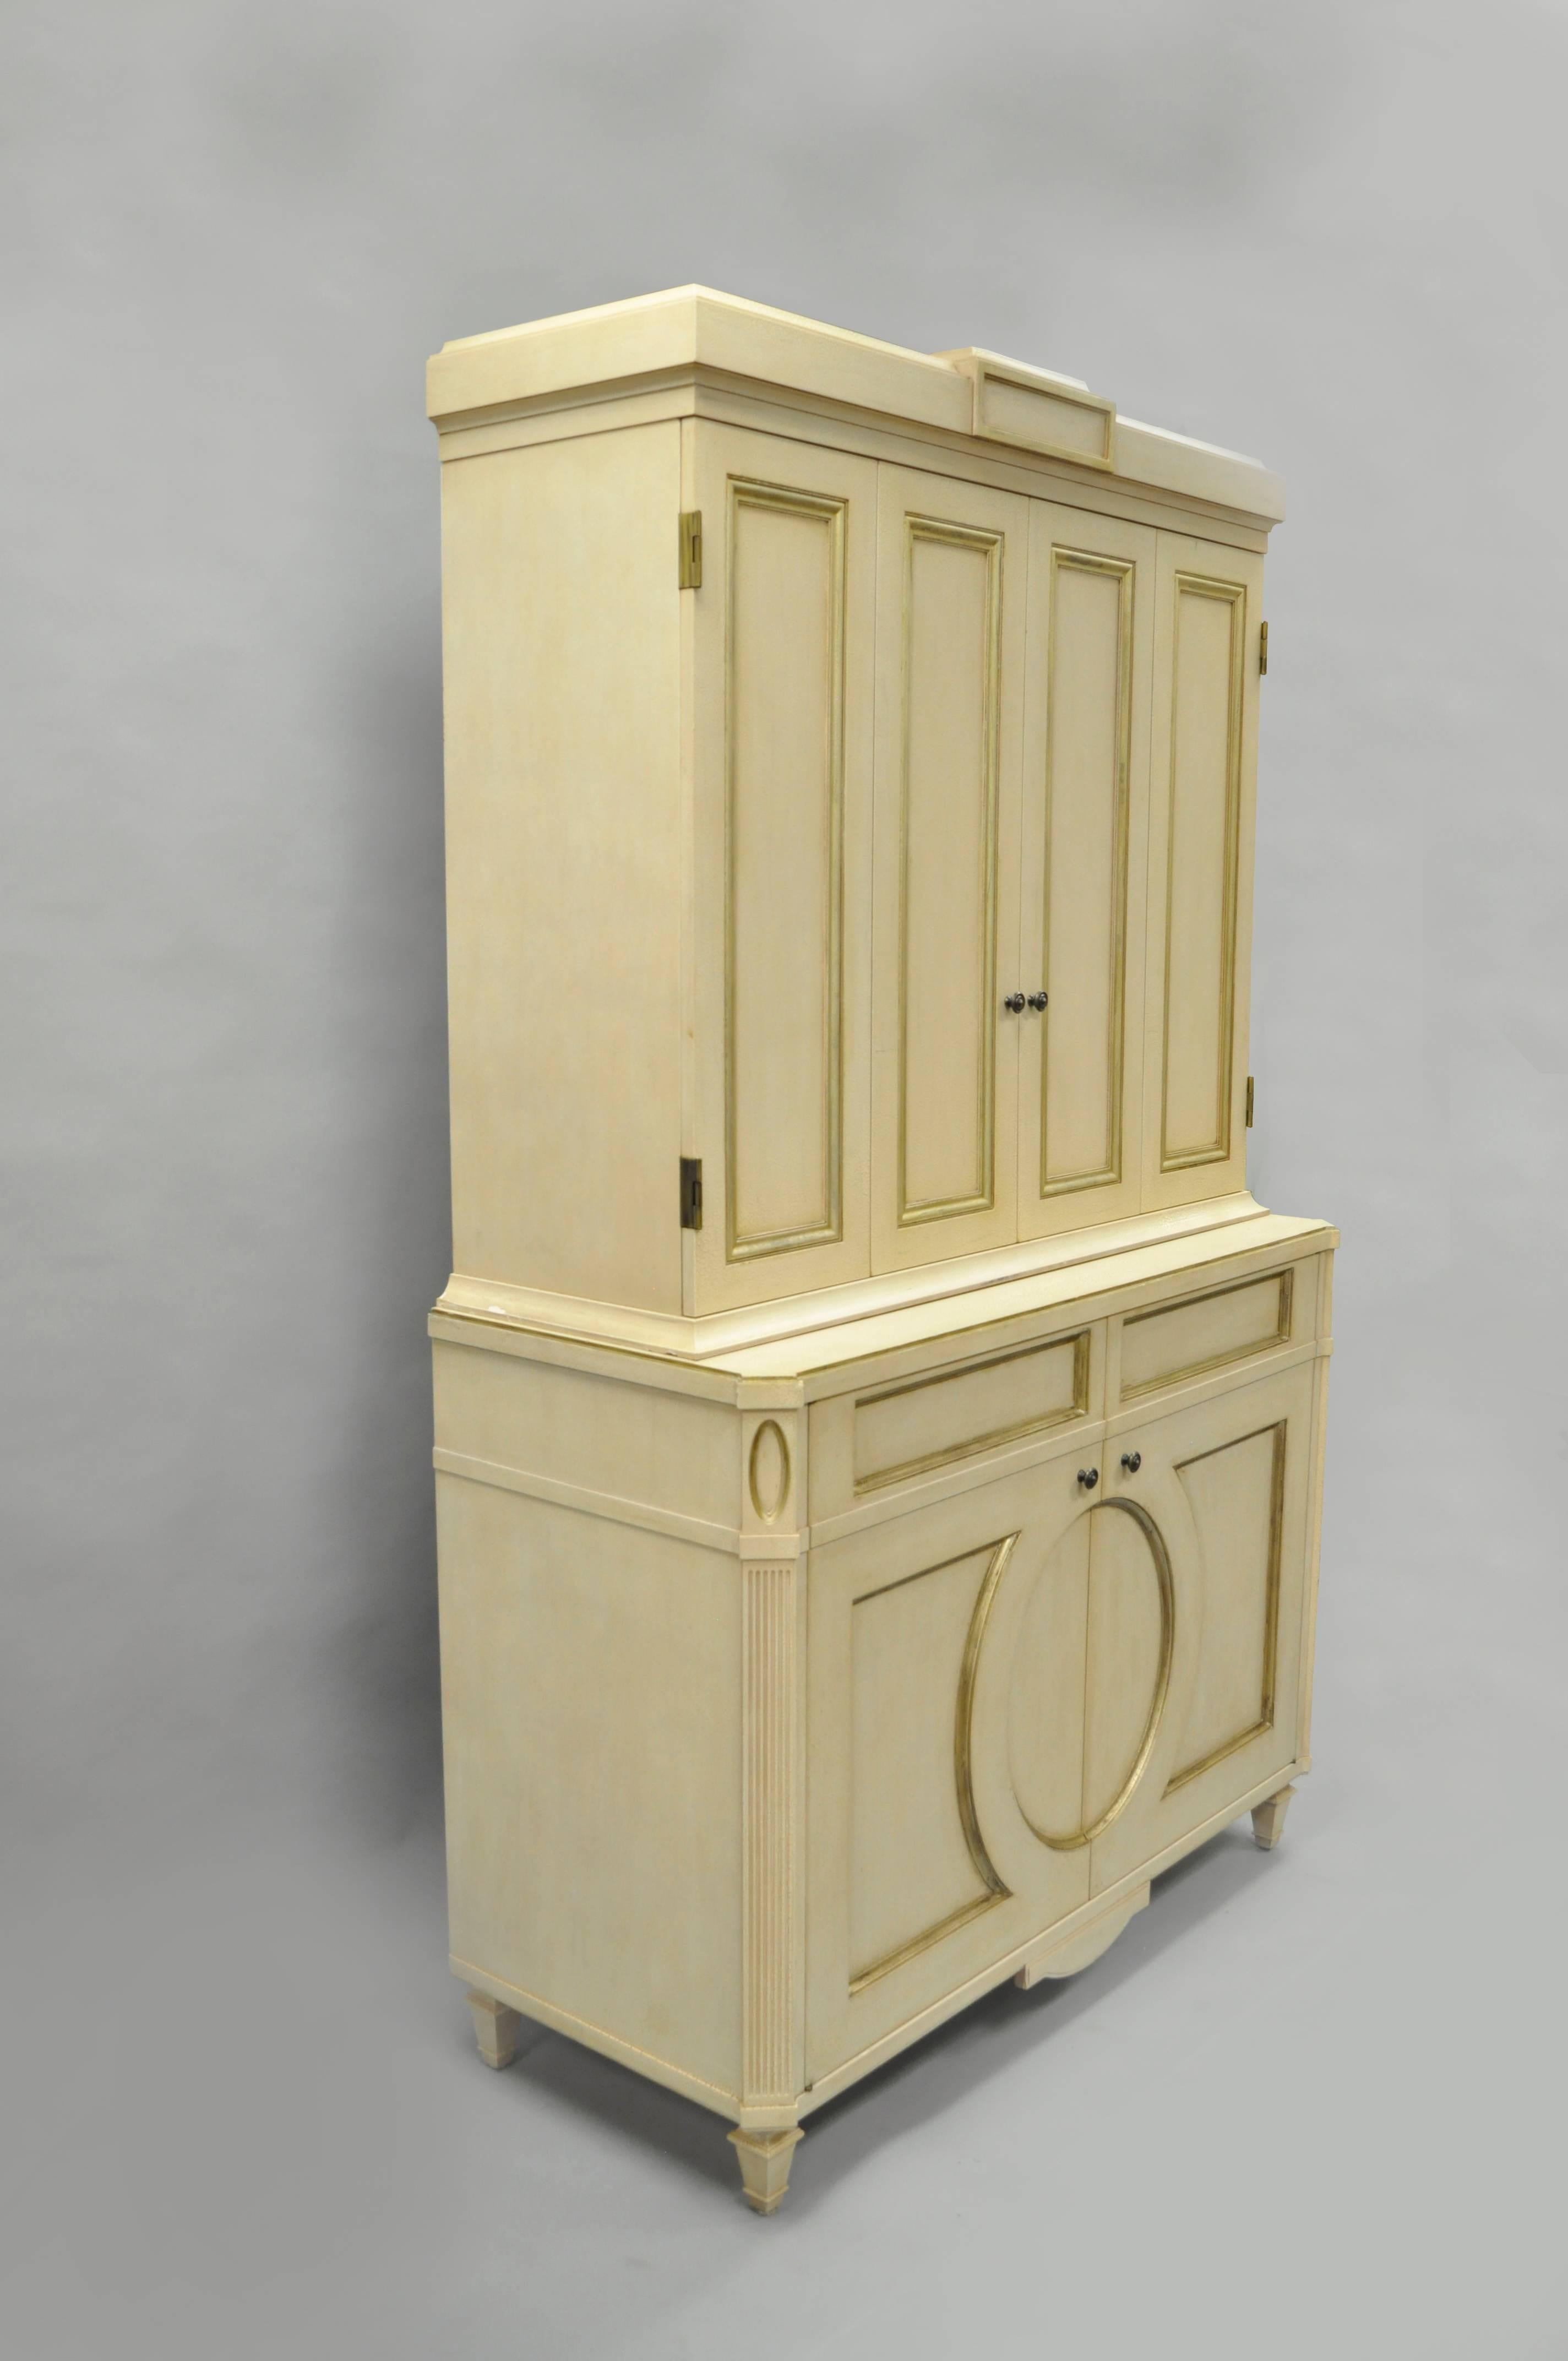 Large and impressive late 20th century custom-made cream and gold distress painted cabinet by Decca in the French Louis XVI Directoire/neoclassical style. Item features a heavy two part construction with crackle distress painted cream finish with